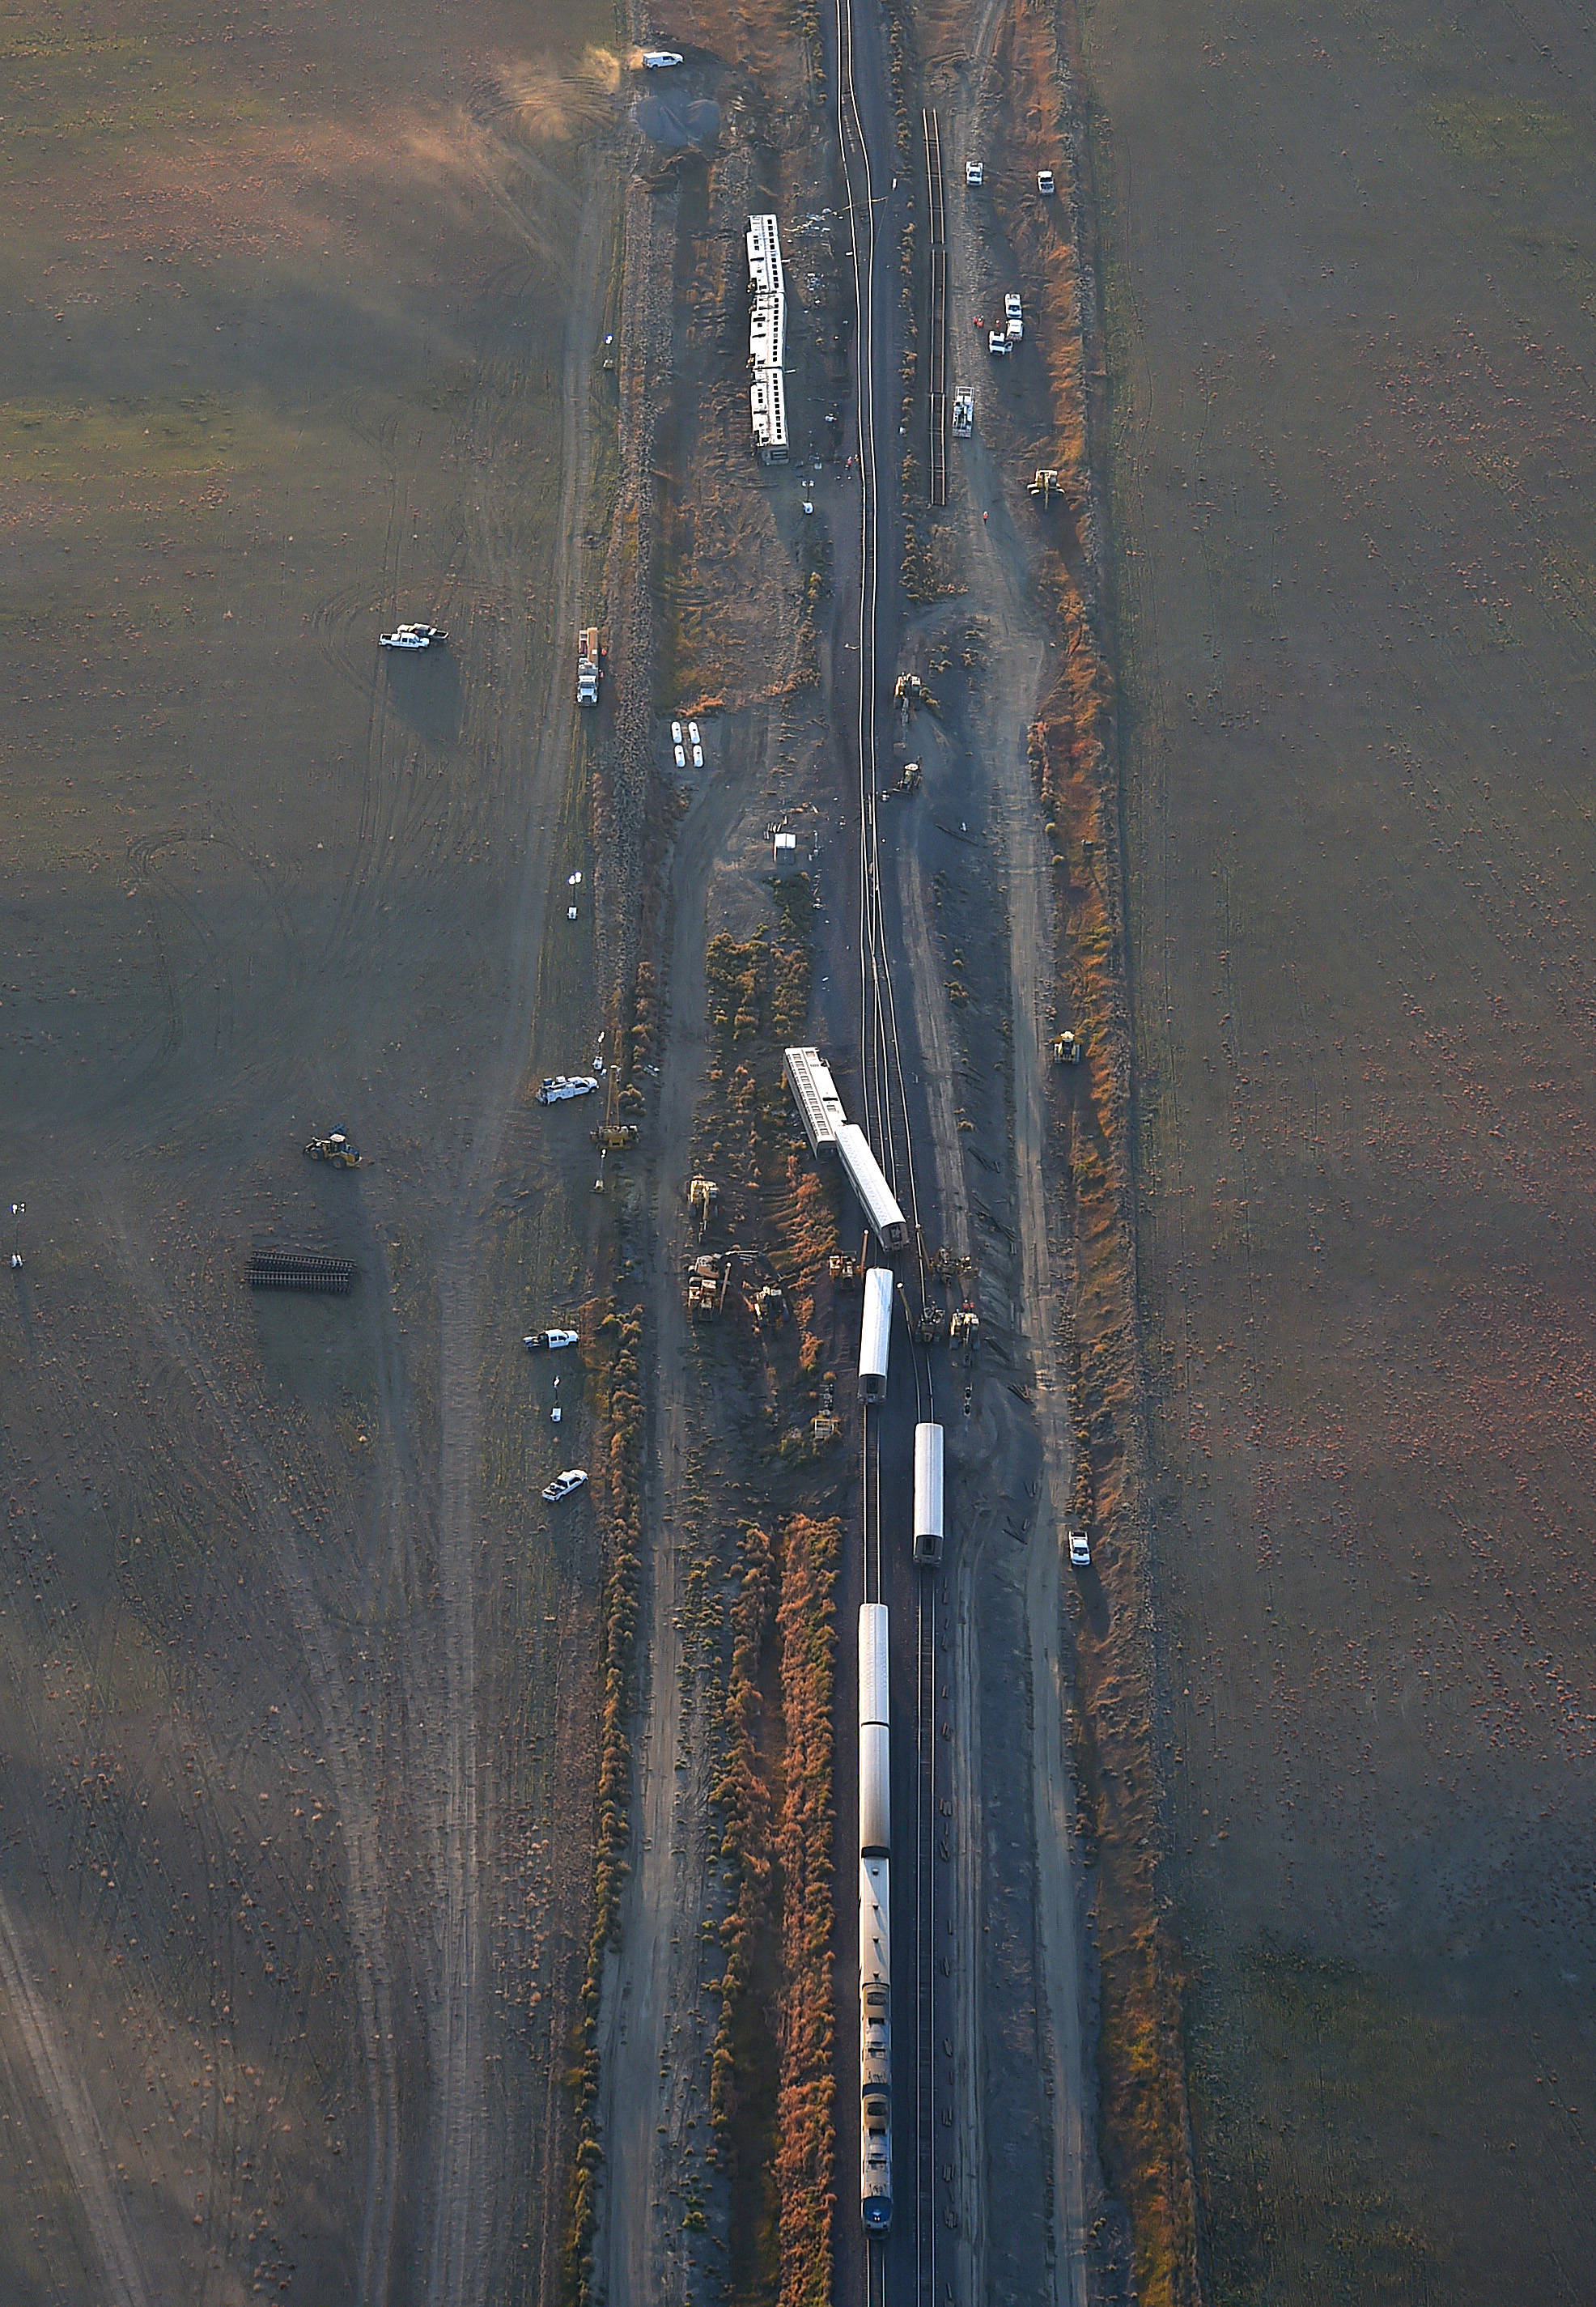 (This photo taken on Sept. 26, 2021, shows the aerial view of the accident scene, derailed train, and debris. Photo courtesy of 